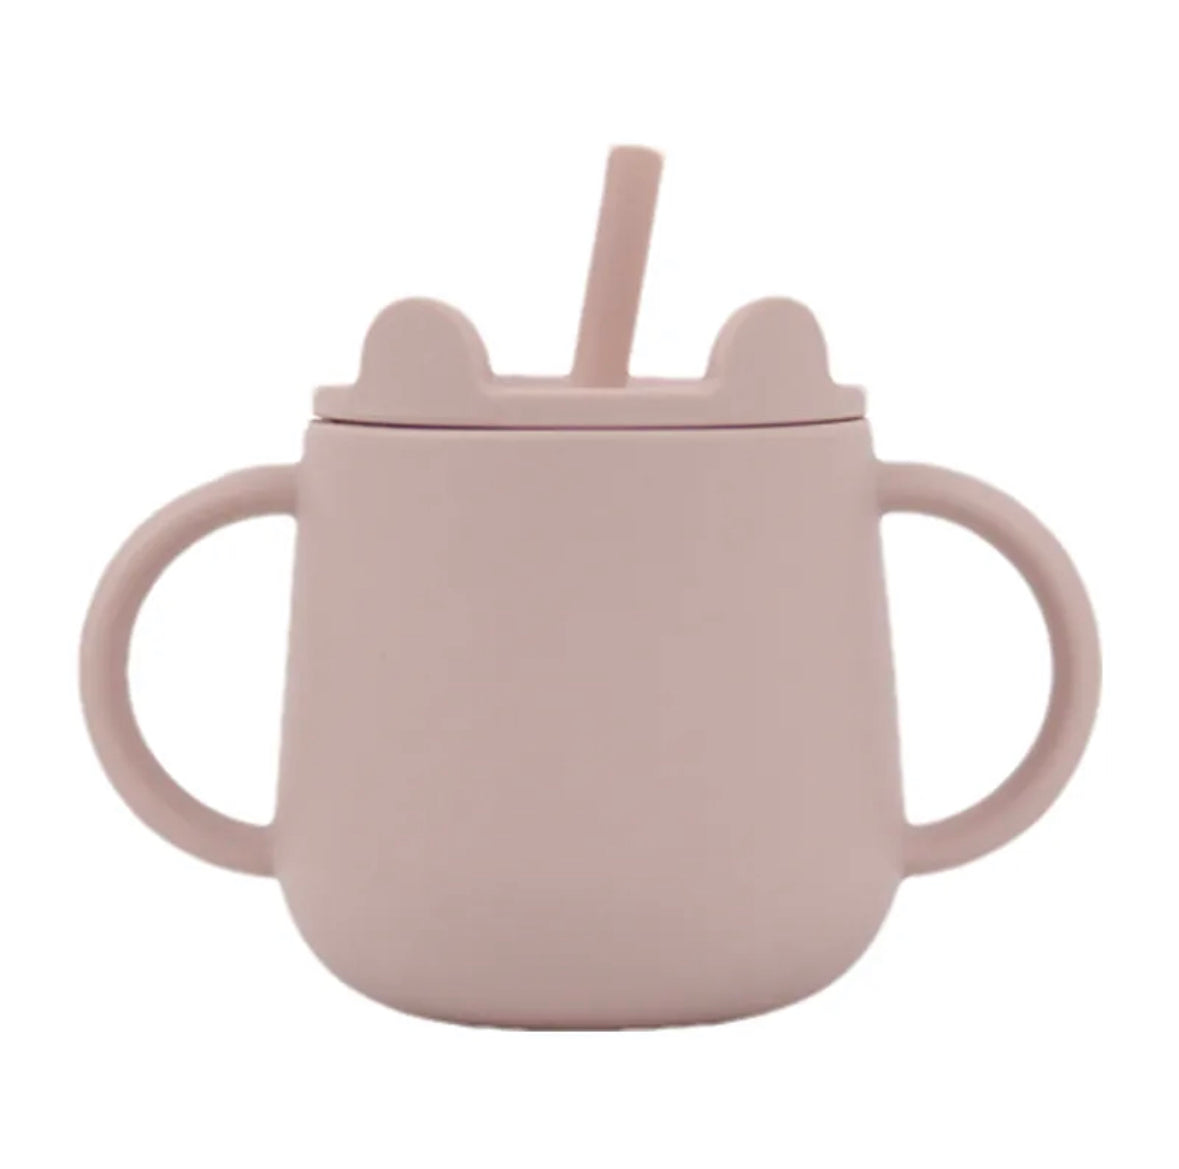 Bear Silicone Cup With Straw | Blush